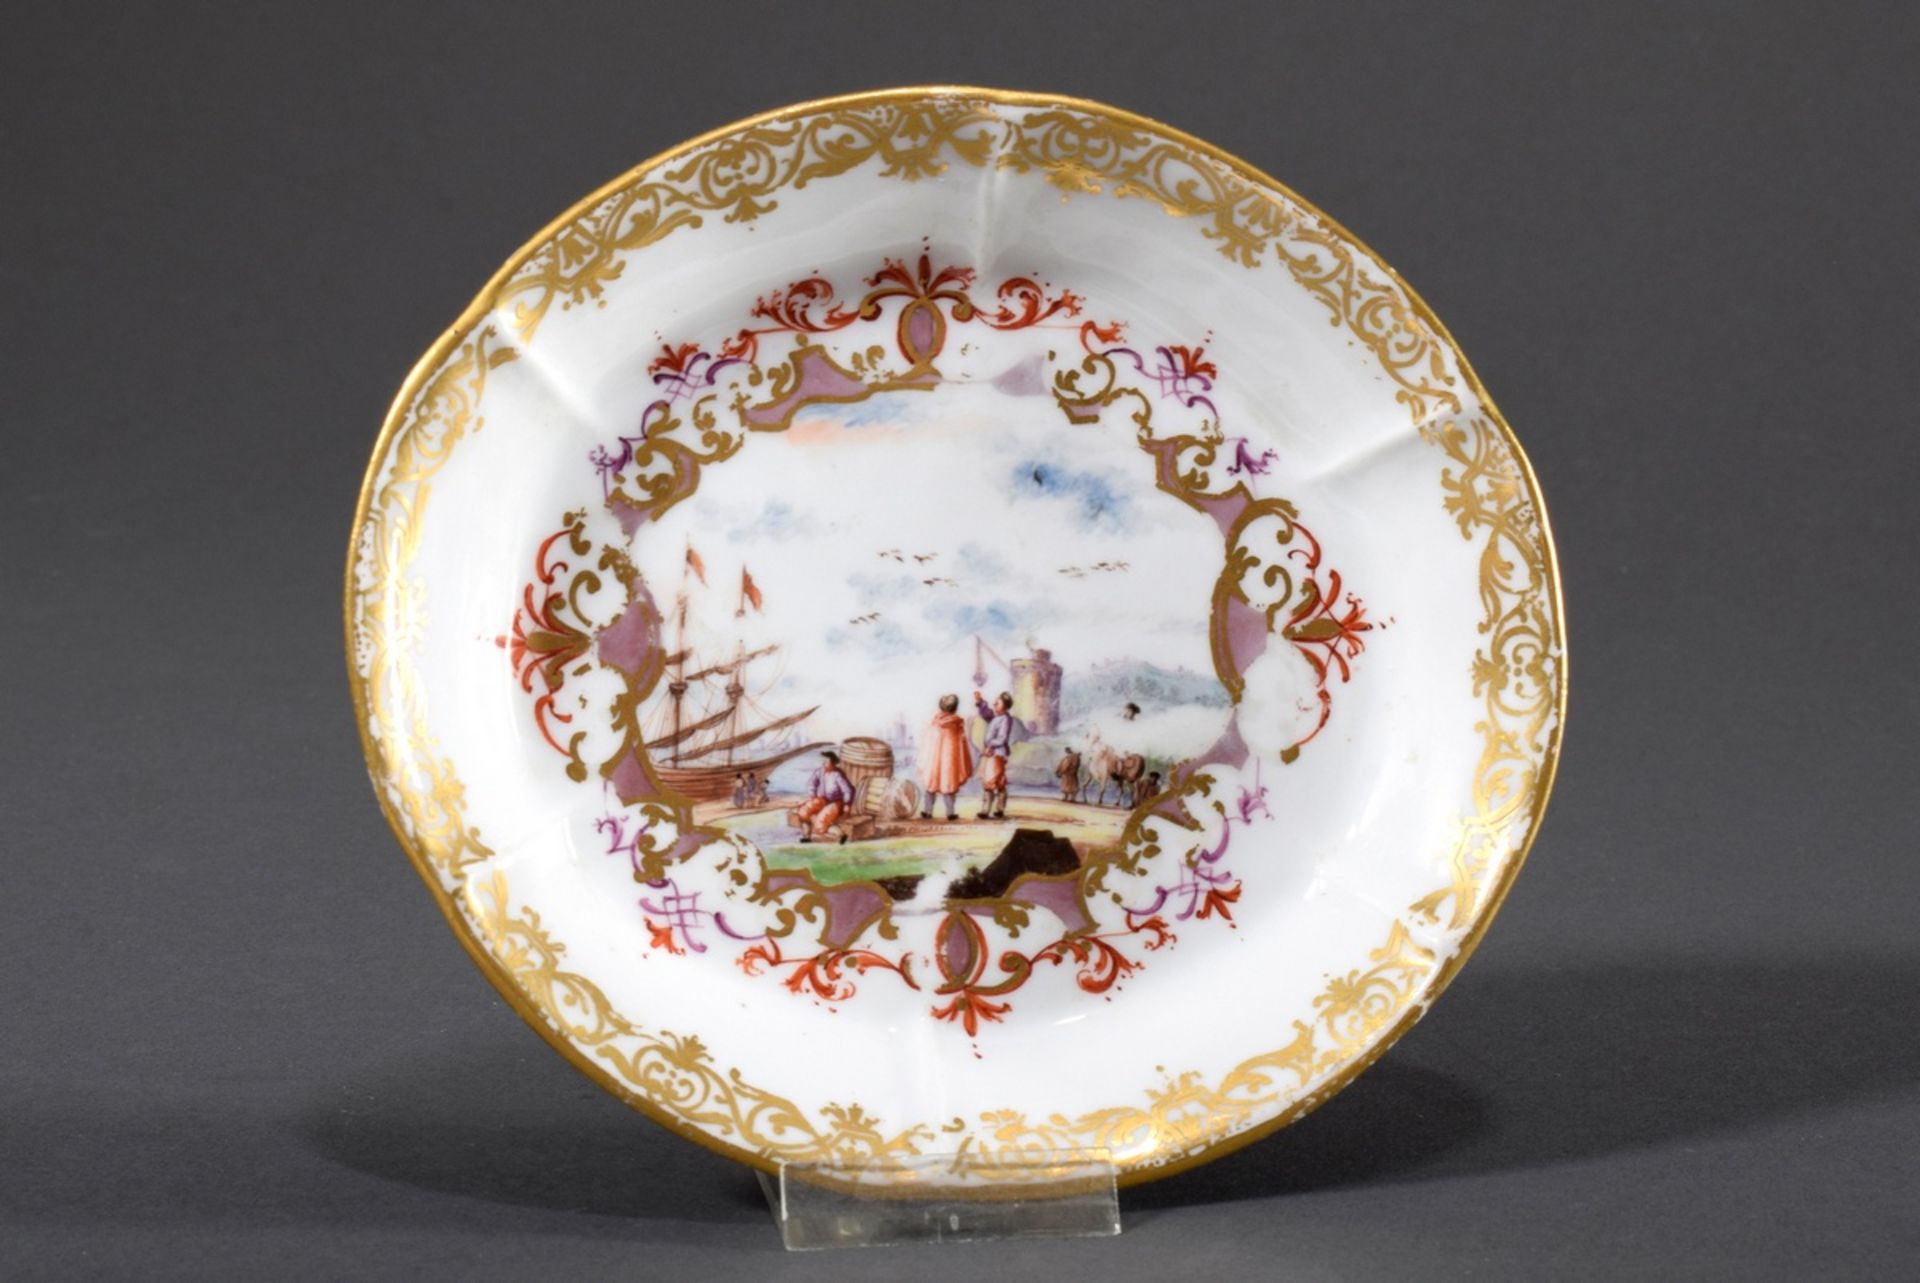 Oval Meissen bowl with polychrome painting in the manner of Christian Friedrich Herold "Kauffahrtei